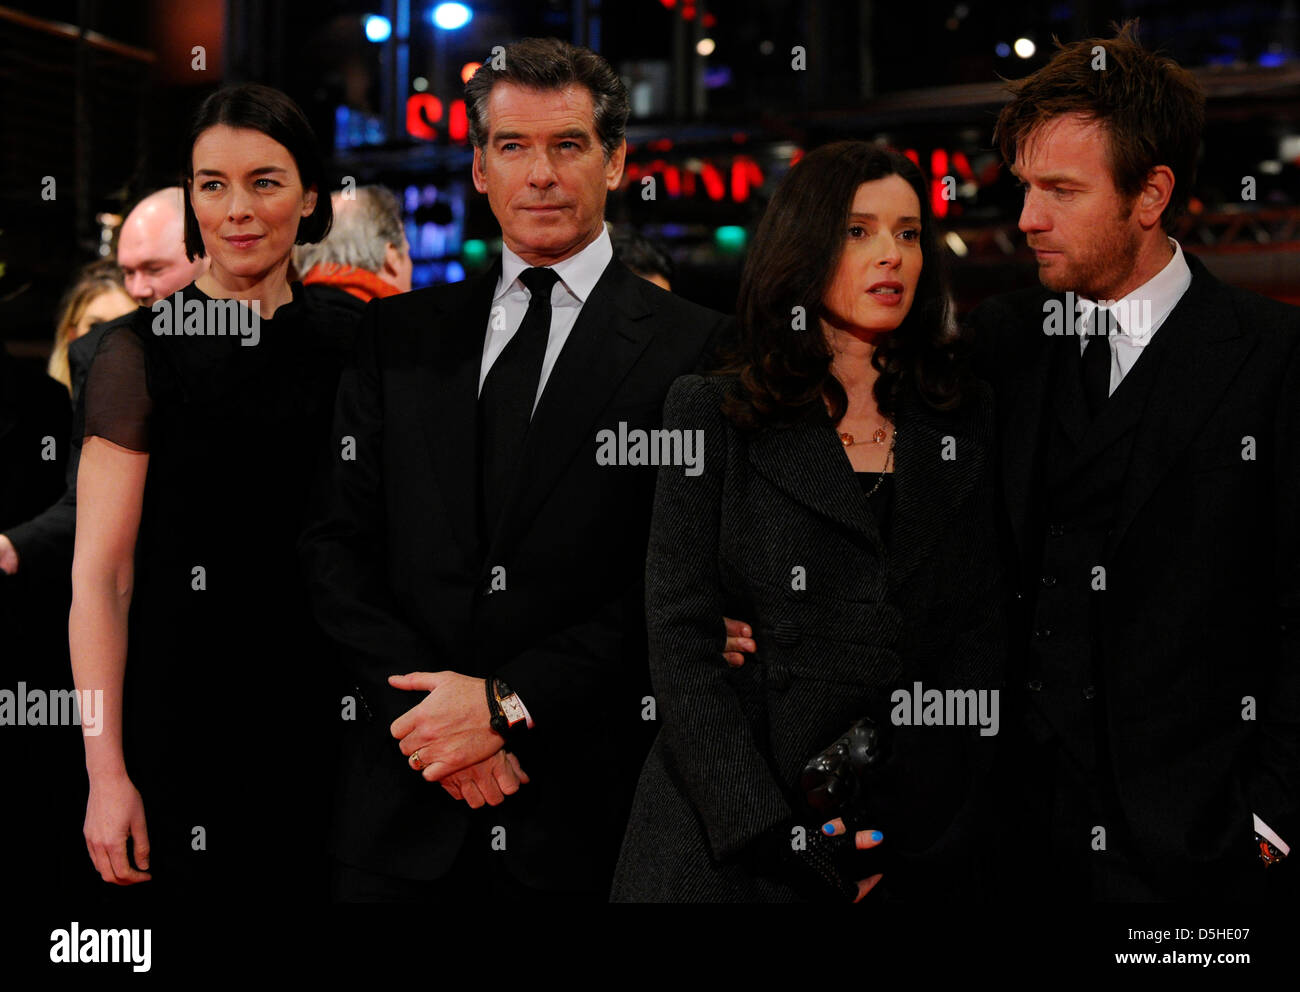 Irish actor Pierce Brosnan (2l), British actress Olivia Williams (l), Scottish actor Ewan McGregor and his wife Eve Mavrakis arrives for the premiere of the film 'The Ghost Writer' during the 60th Berlinale International Film Festival in Berlin, Germany, Friday 12 February 2010. Photo: Soeren Stache dpa/lbn Stock Photo